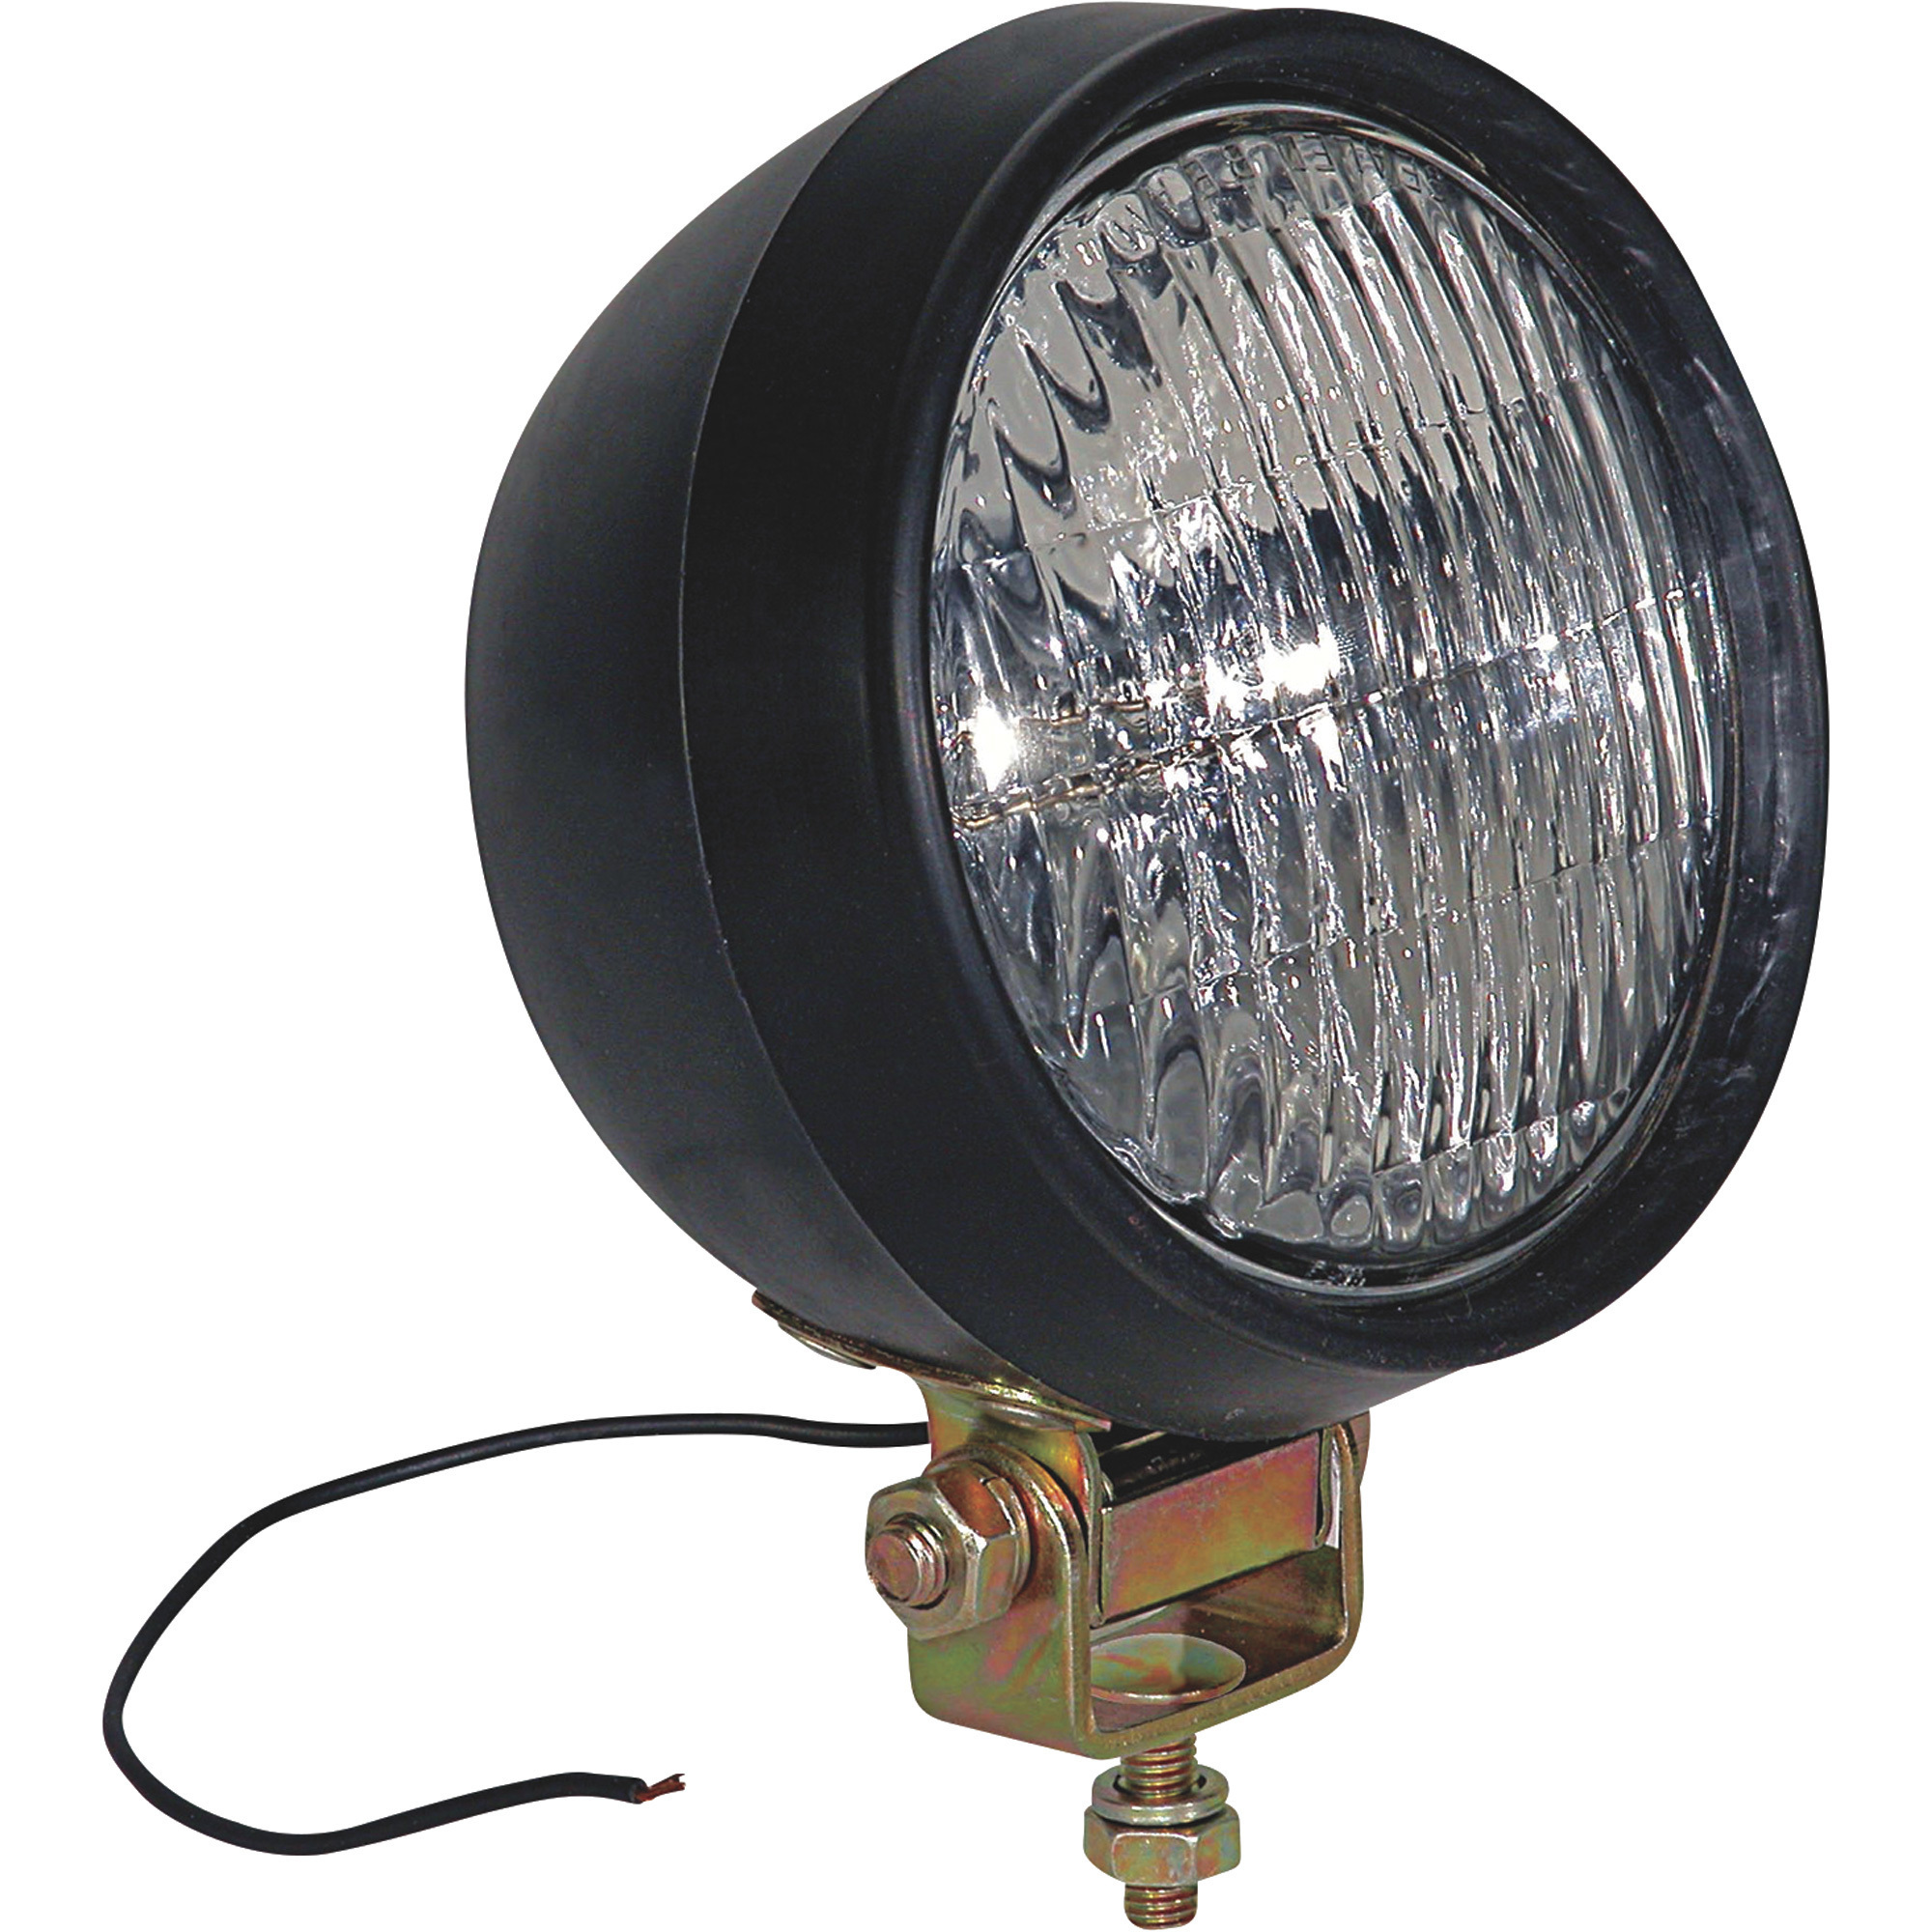 Buyers Products 12 Volt Halogen Utility Light, 5Inch, 35 Watts, Model #1492100